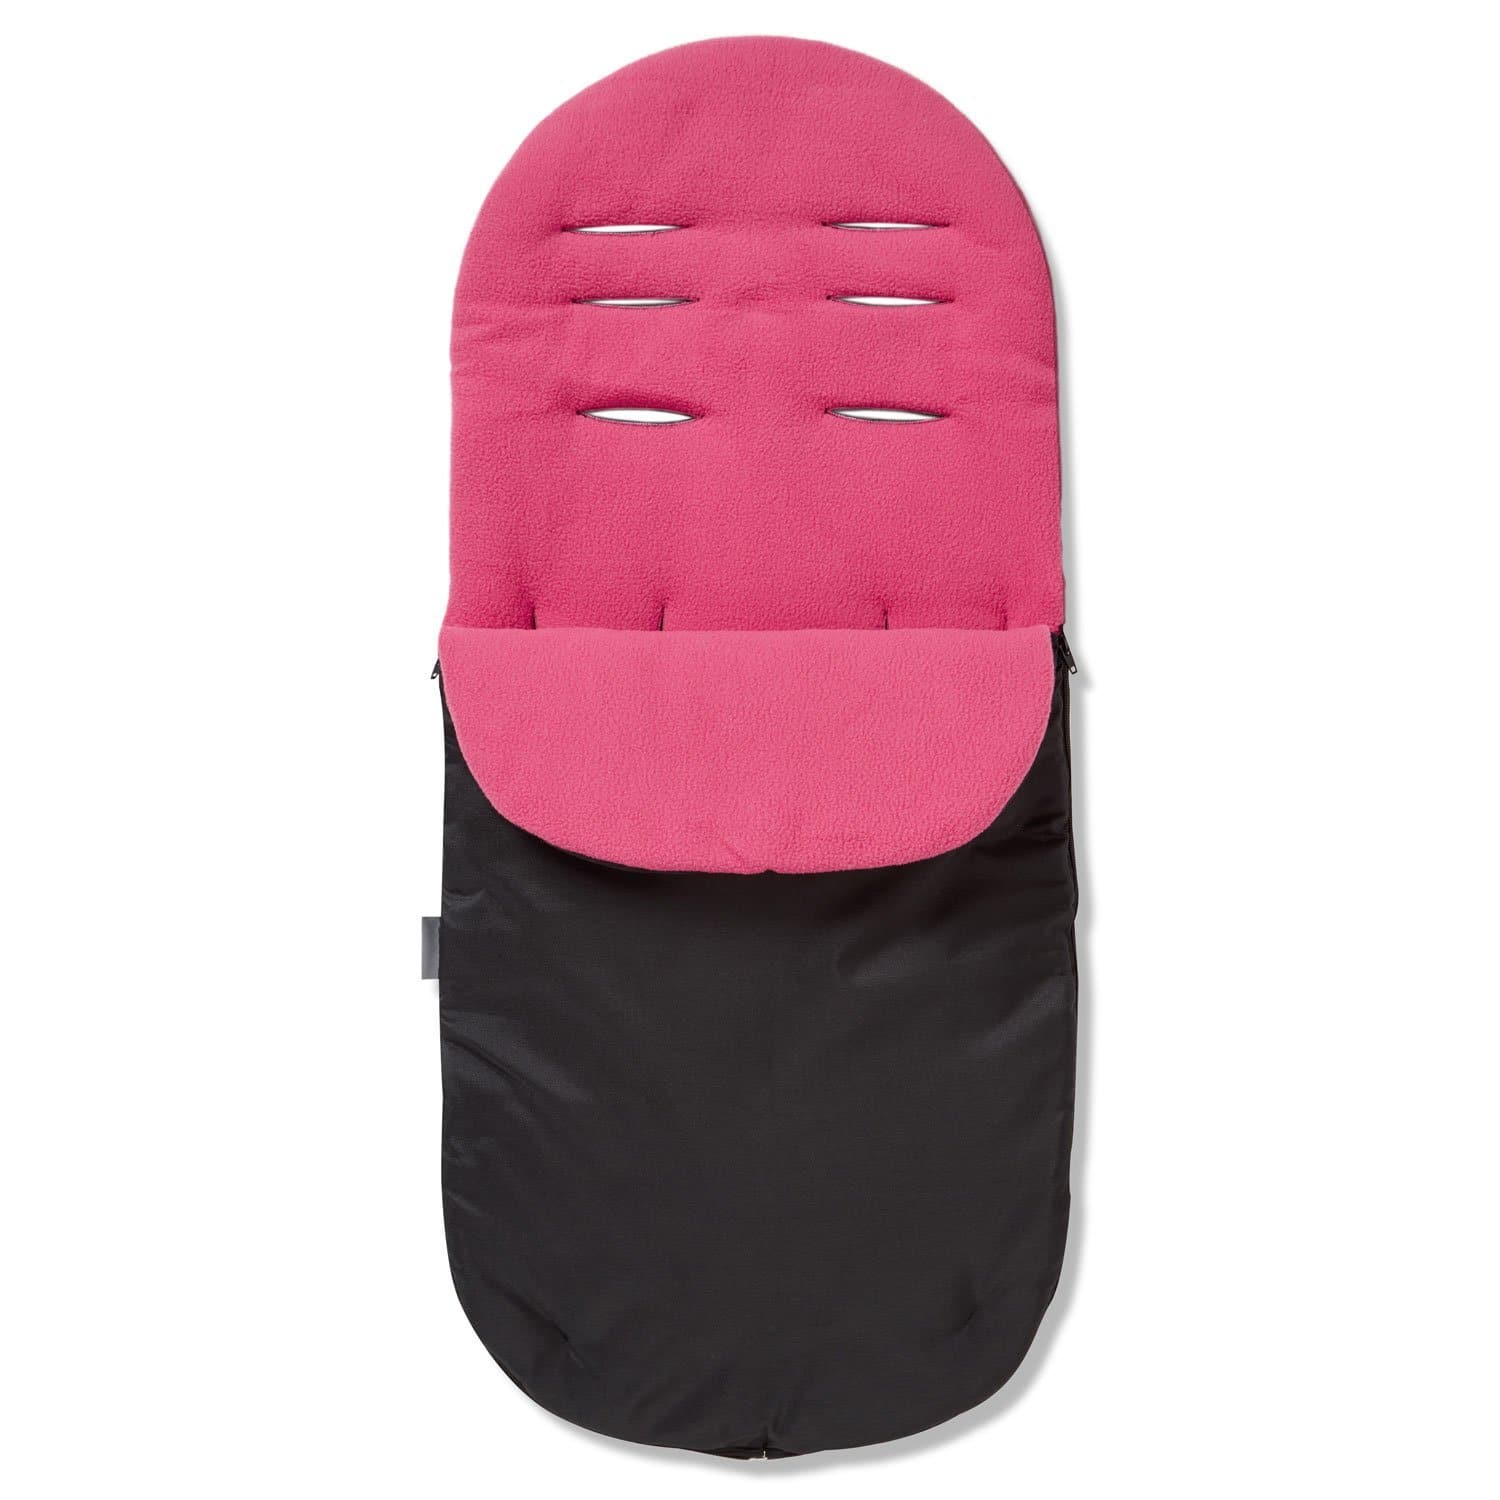 Footmuff / Cosy Toes Compatible with Brio - For Your Little One